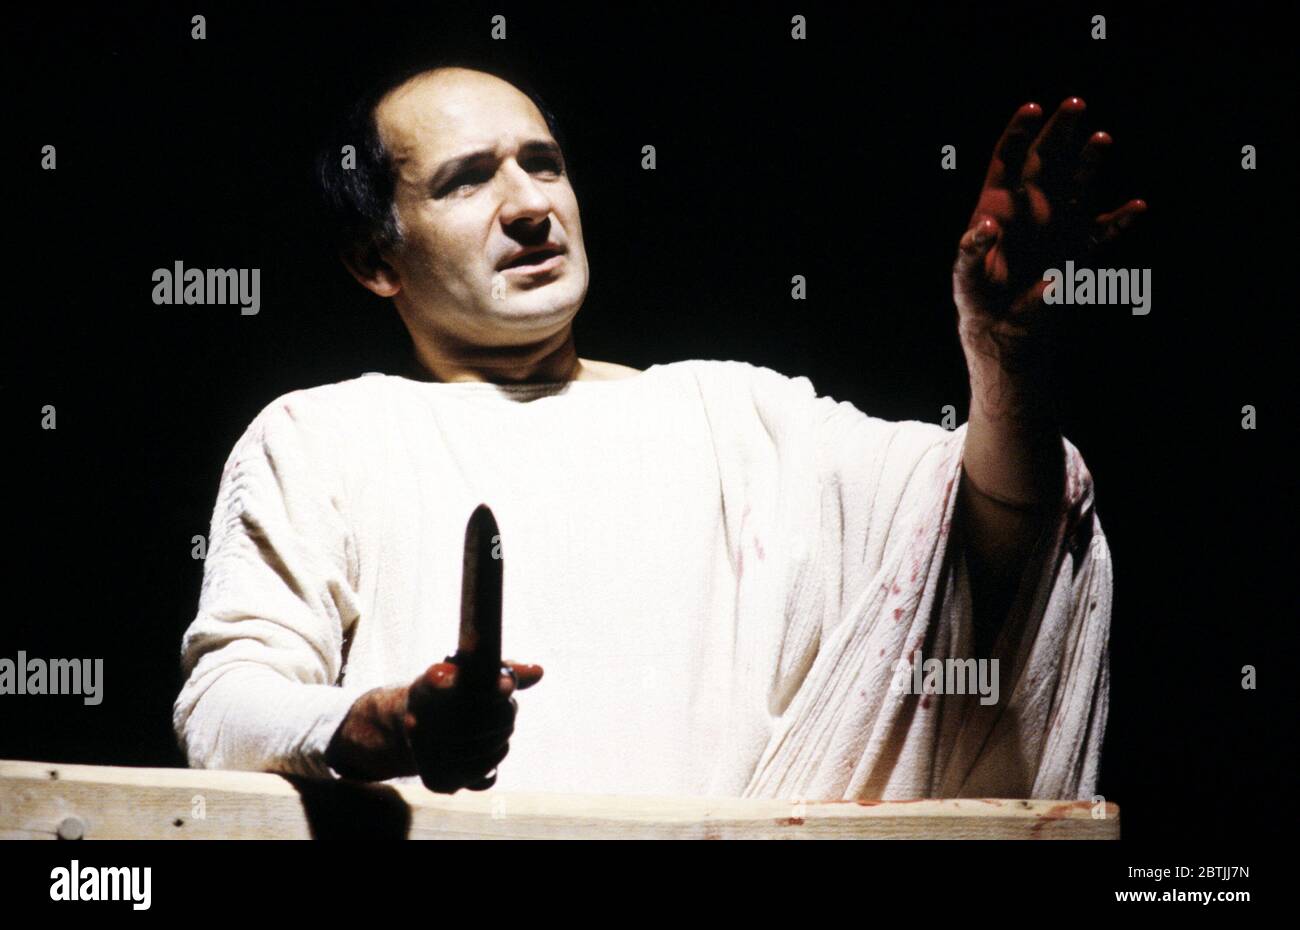 Ben Kingsley (Marcus Brutus) in JULIUS CAESAR by Shakespeare at the Royal Shakespeare Company (RSC), Royal Shakespeare Theatre, Stratford-upon-Avon  26/09/1979  design: Christopher Morley   lighting: Brian Harris   director: Barry Kyle Stock Photo